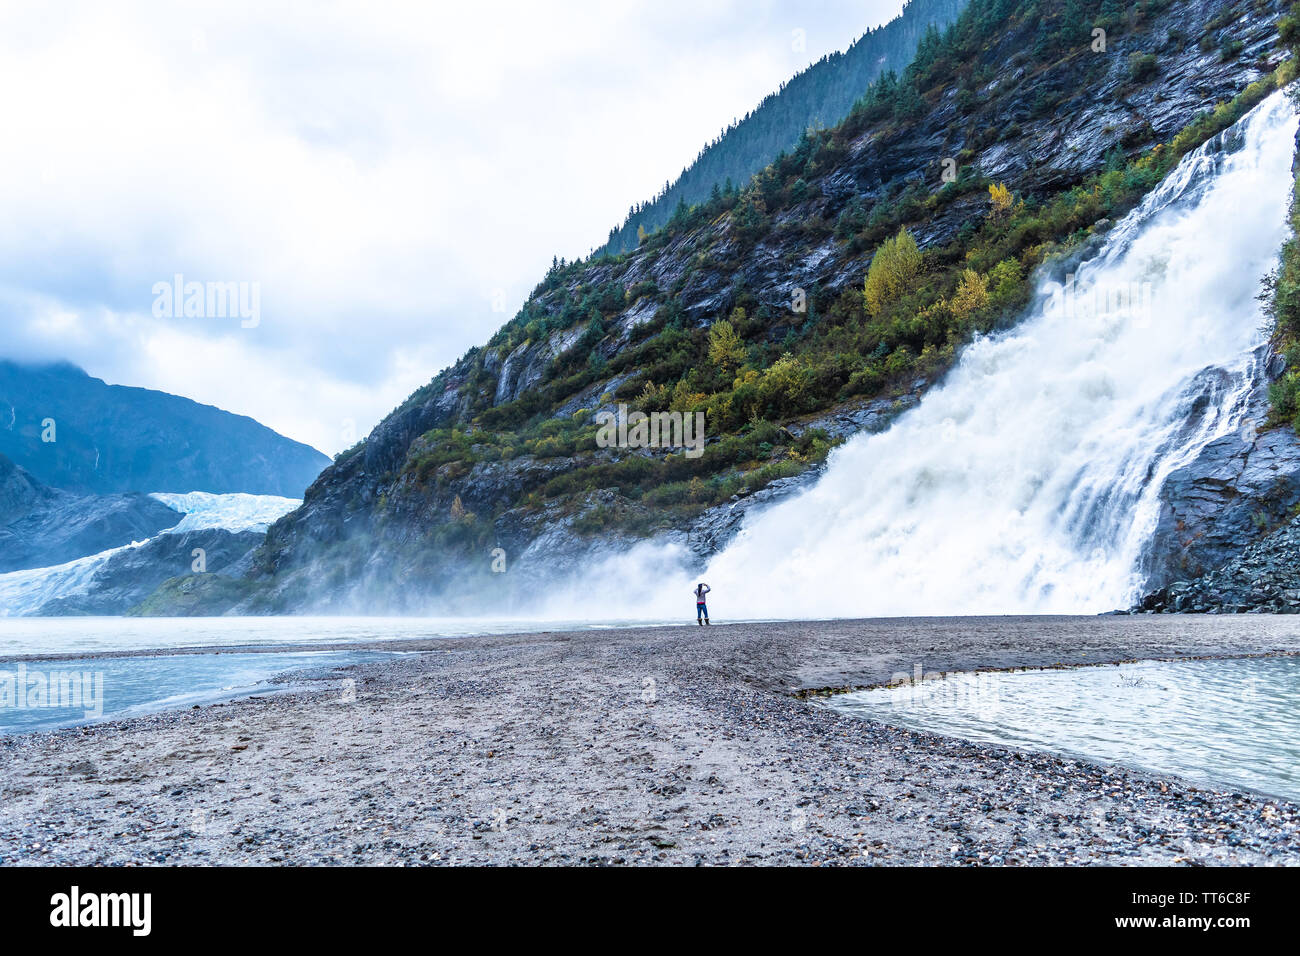 Nugget Falls, also known as Nugget Creek Falls or Mendenhall Glacier Falls, a waterfall downstream of the Nugget Glacier flowing into Mendenhall Lake. Stock Photo